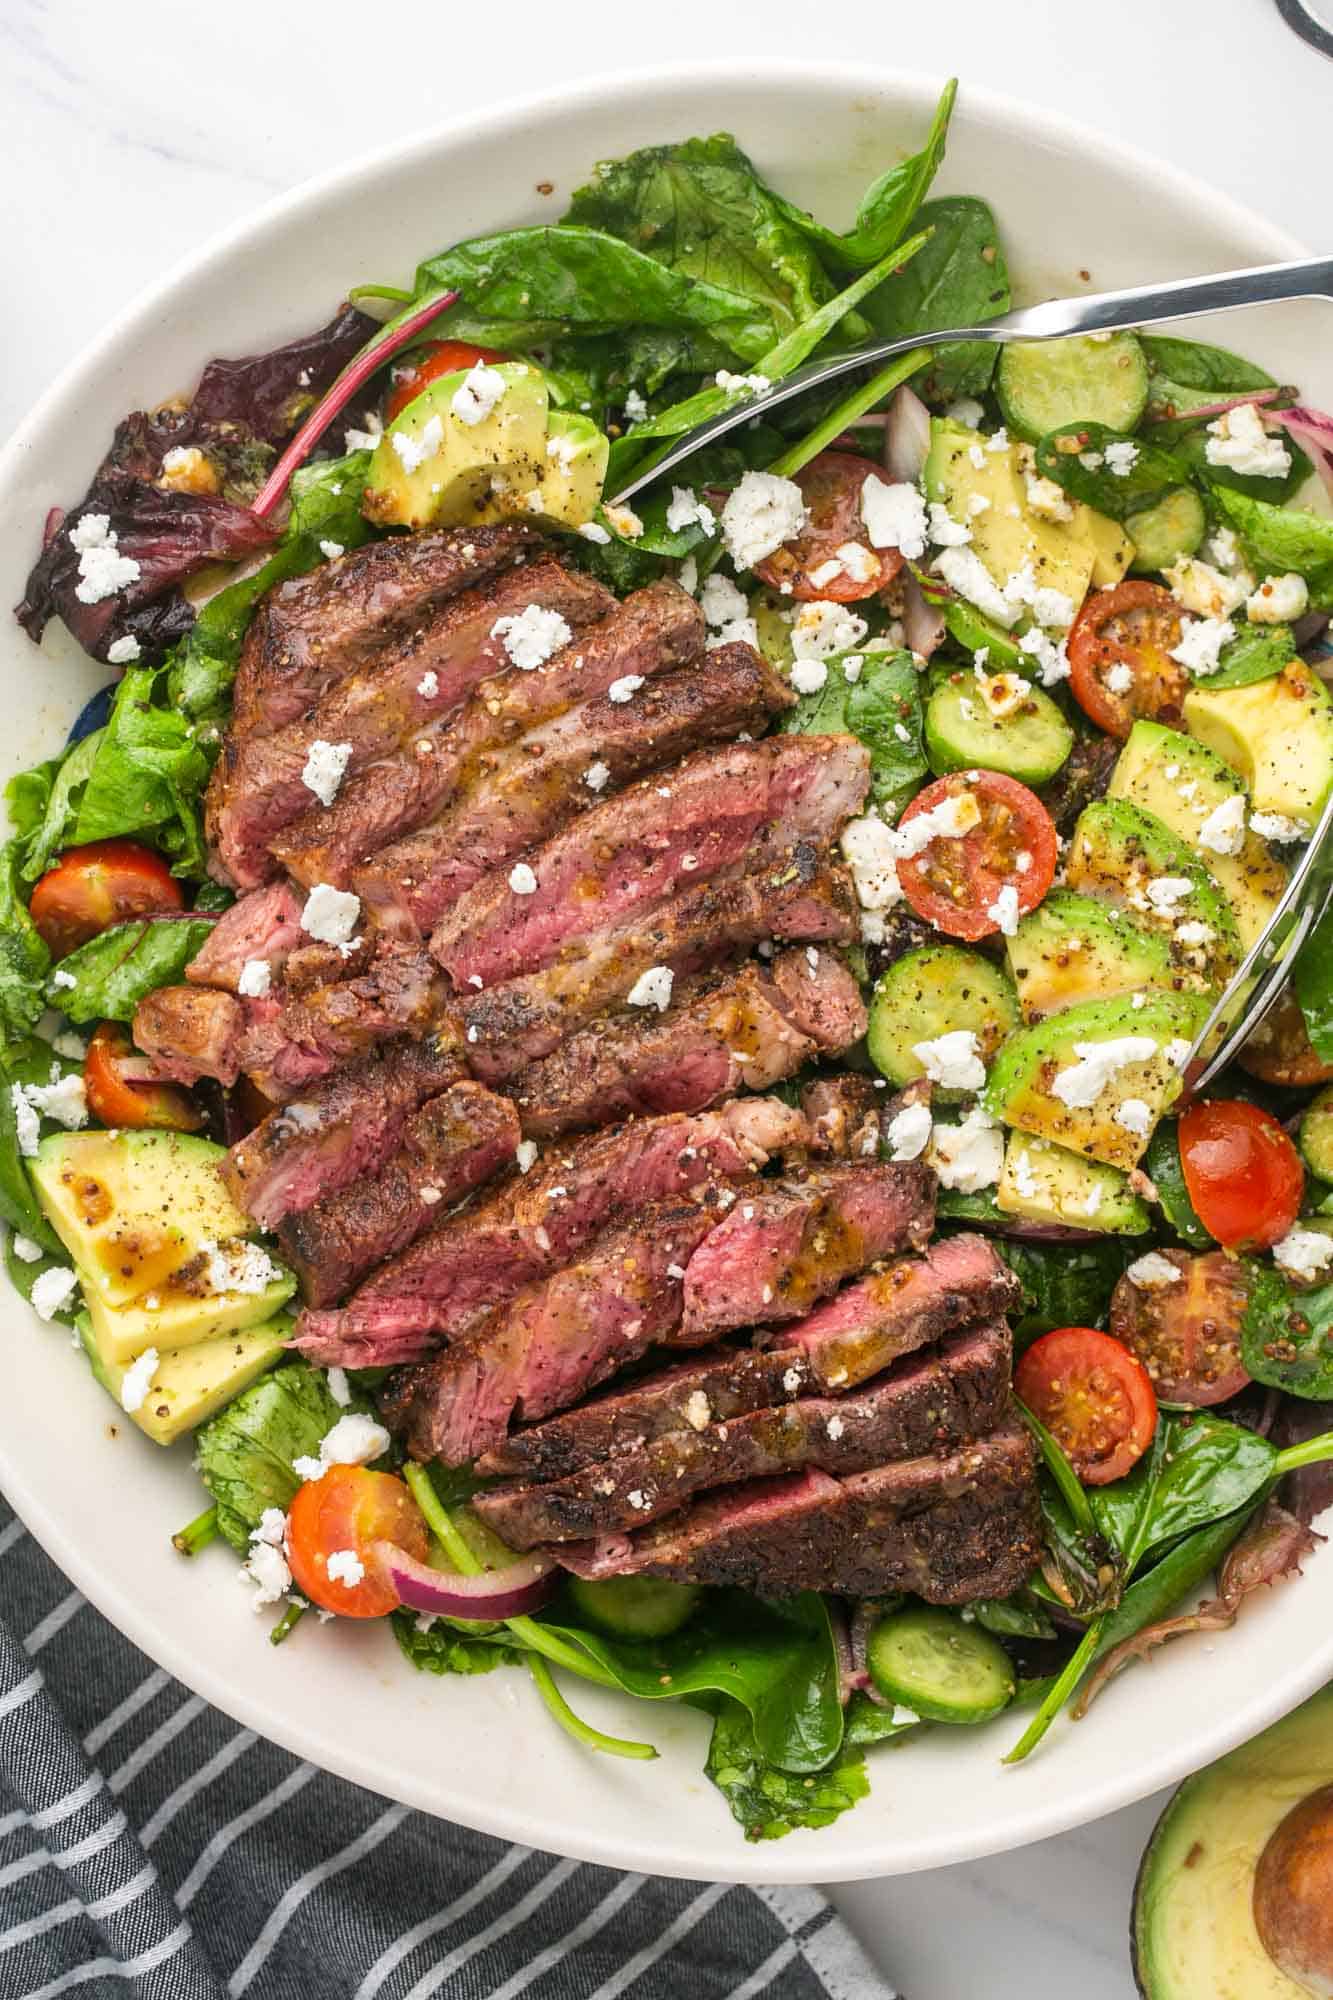 a salad with avocado and crumbled cheese, topped with sliced steak and dressing, in a large serving bowl.